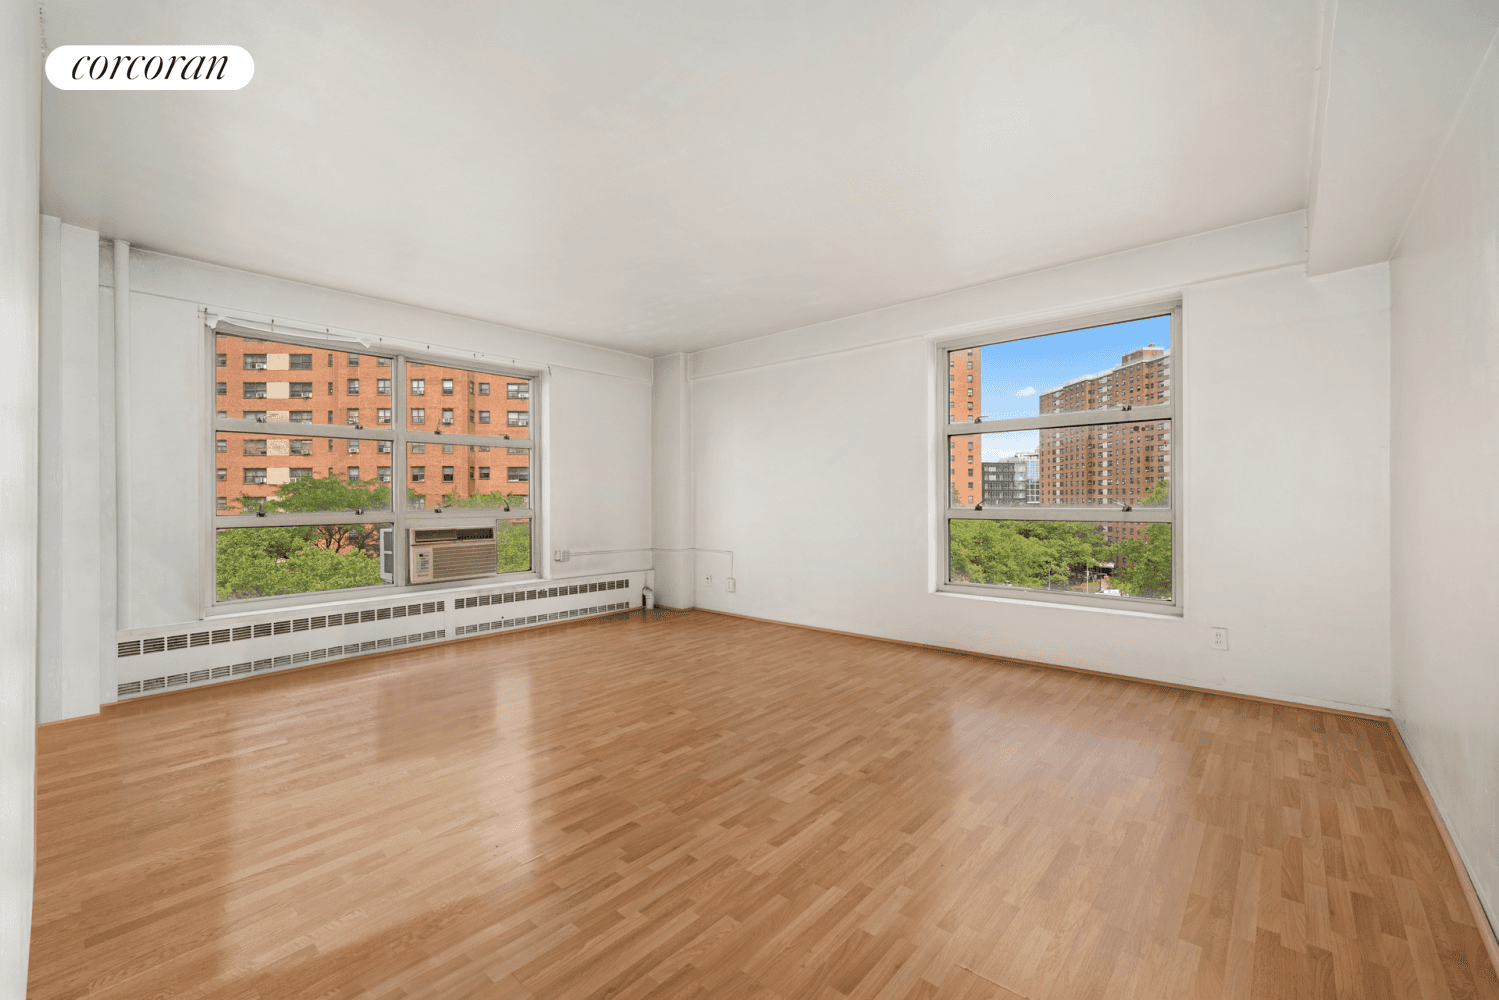 New Low Price for this Freshly Painted Corner 2 Bedroom and 1 bath apartment in Morningside Gardens in Morningside Heights !